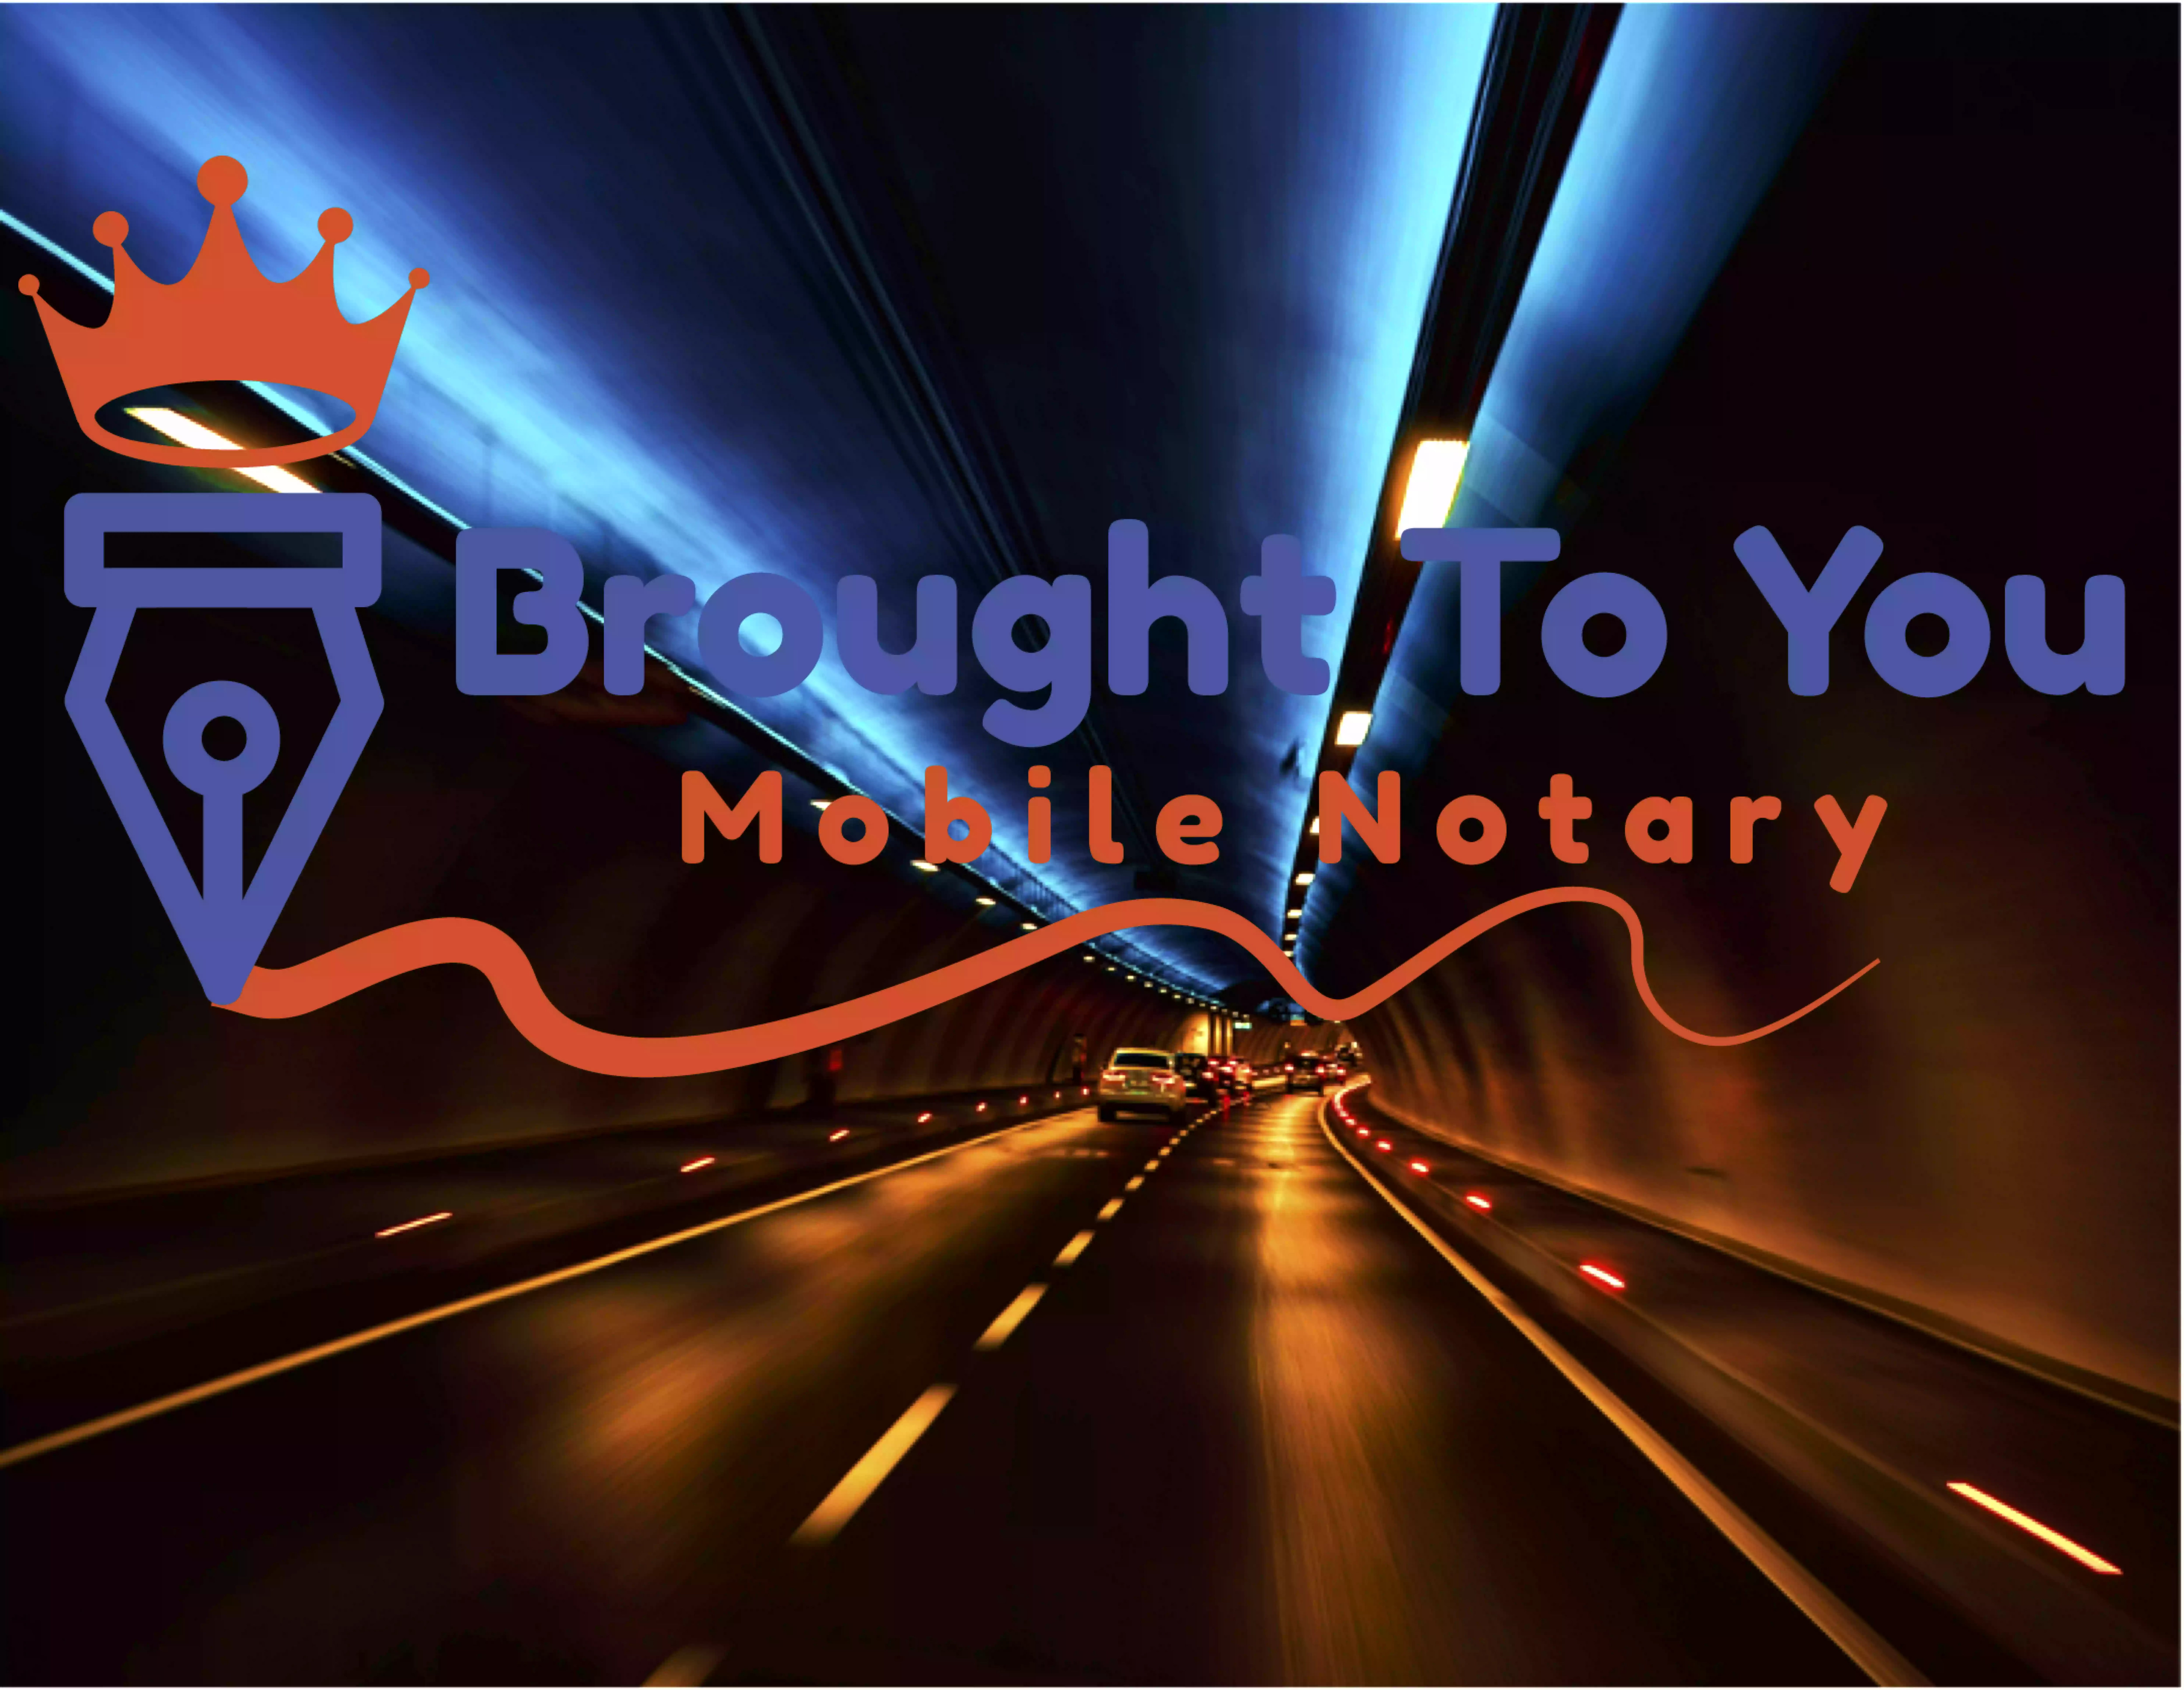 Brought To You Mobile Notary